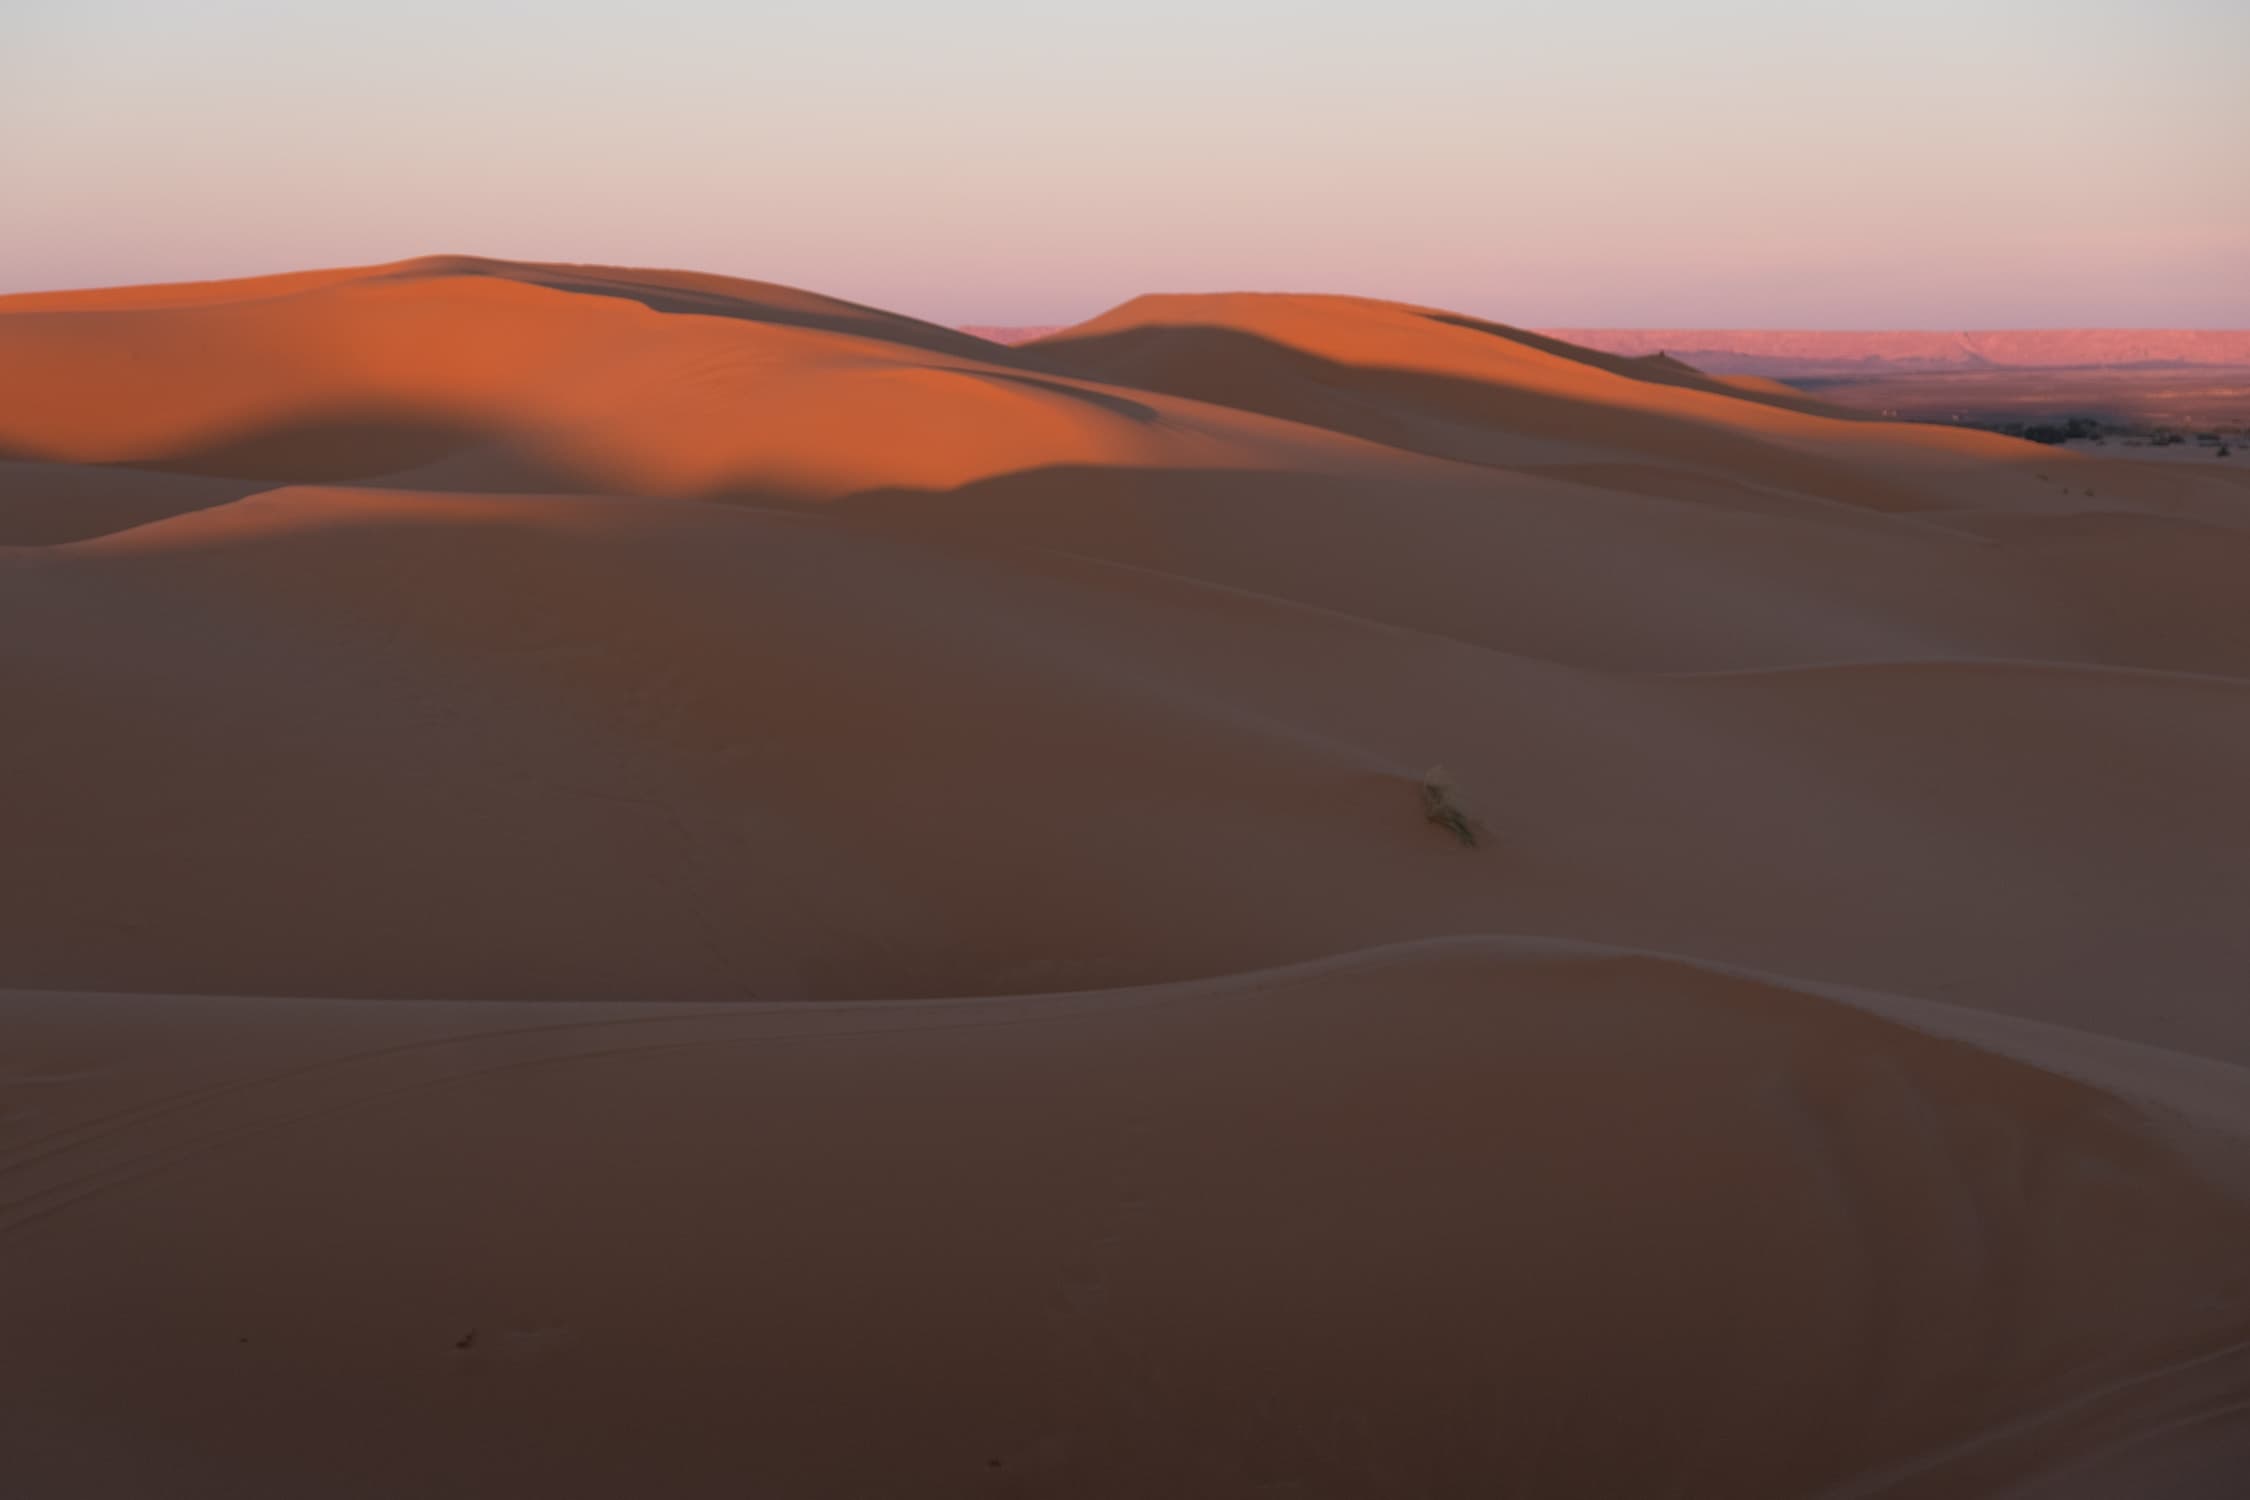 Sunset over layers of sand dunes